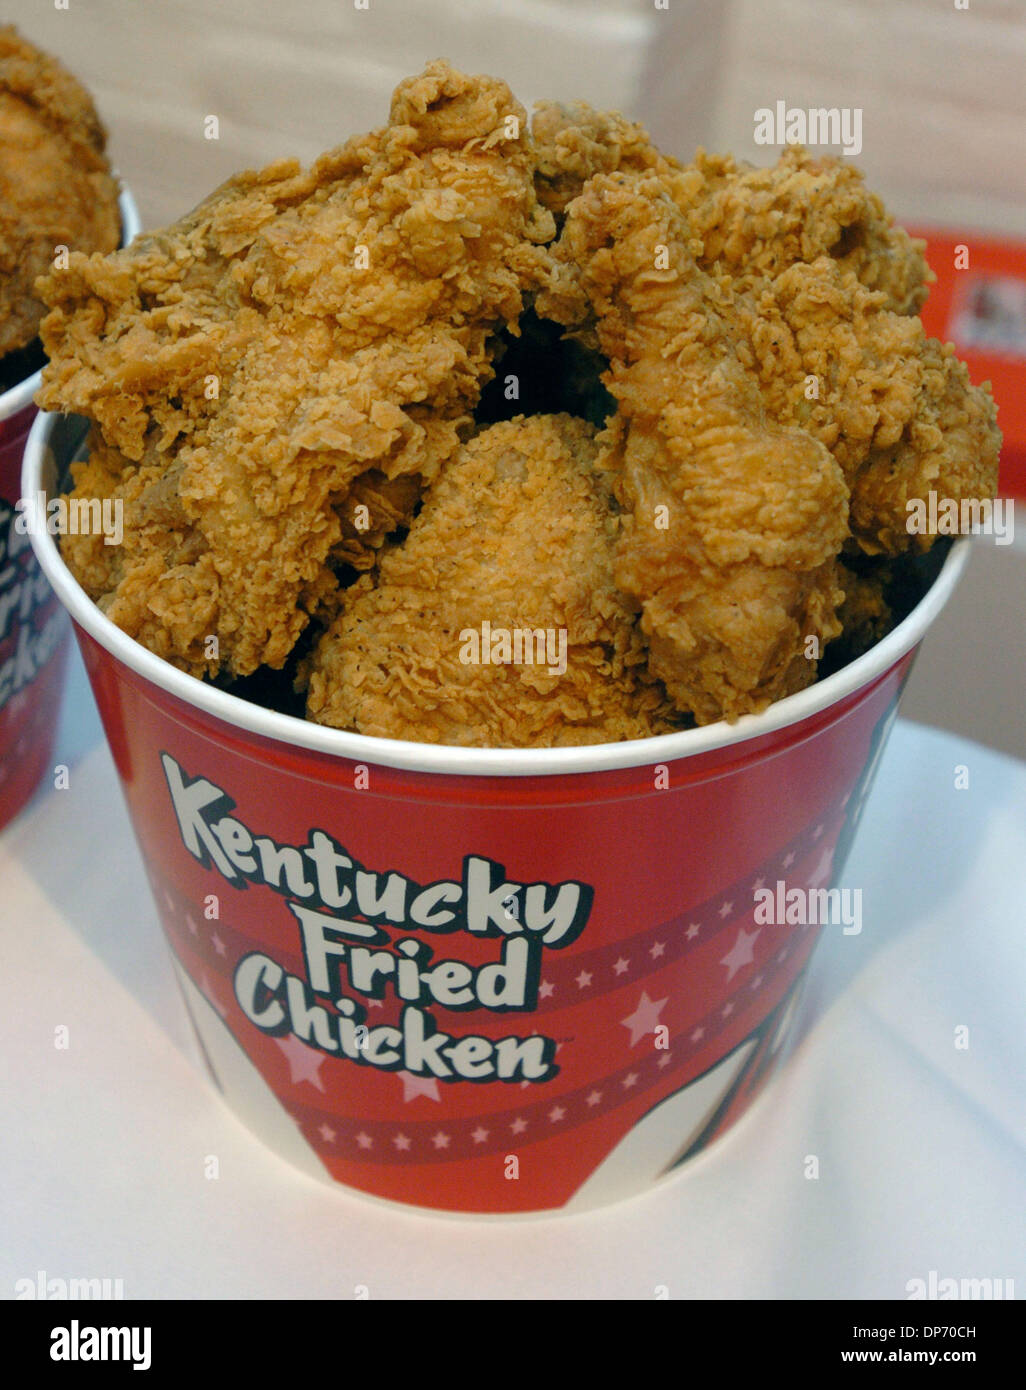 Oct 30, 2006; MANHATTAN, NY, USA; KFC Bucket of Chicken. Gregg Dedrick,  President of KFC Corporation announces in a press conference that Kentucky  Fried Chicken is converting all of its 5,500 restaurants